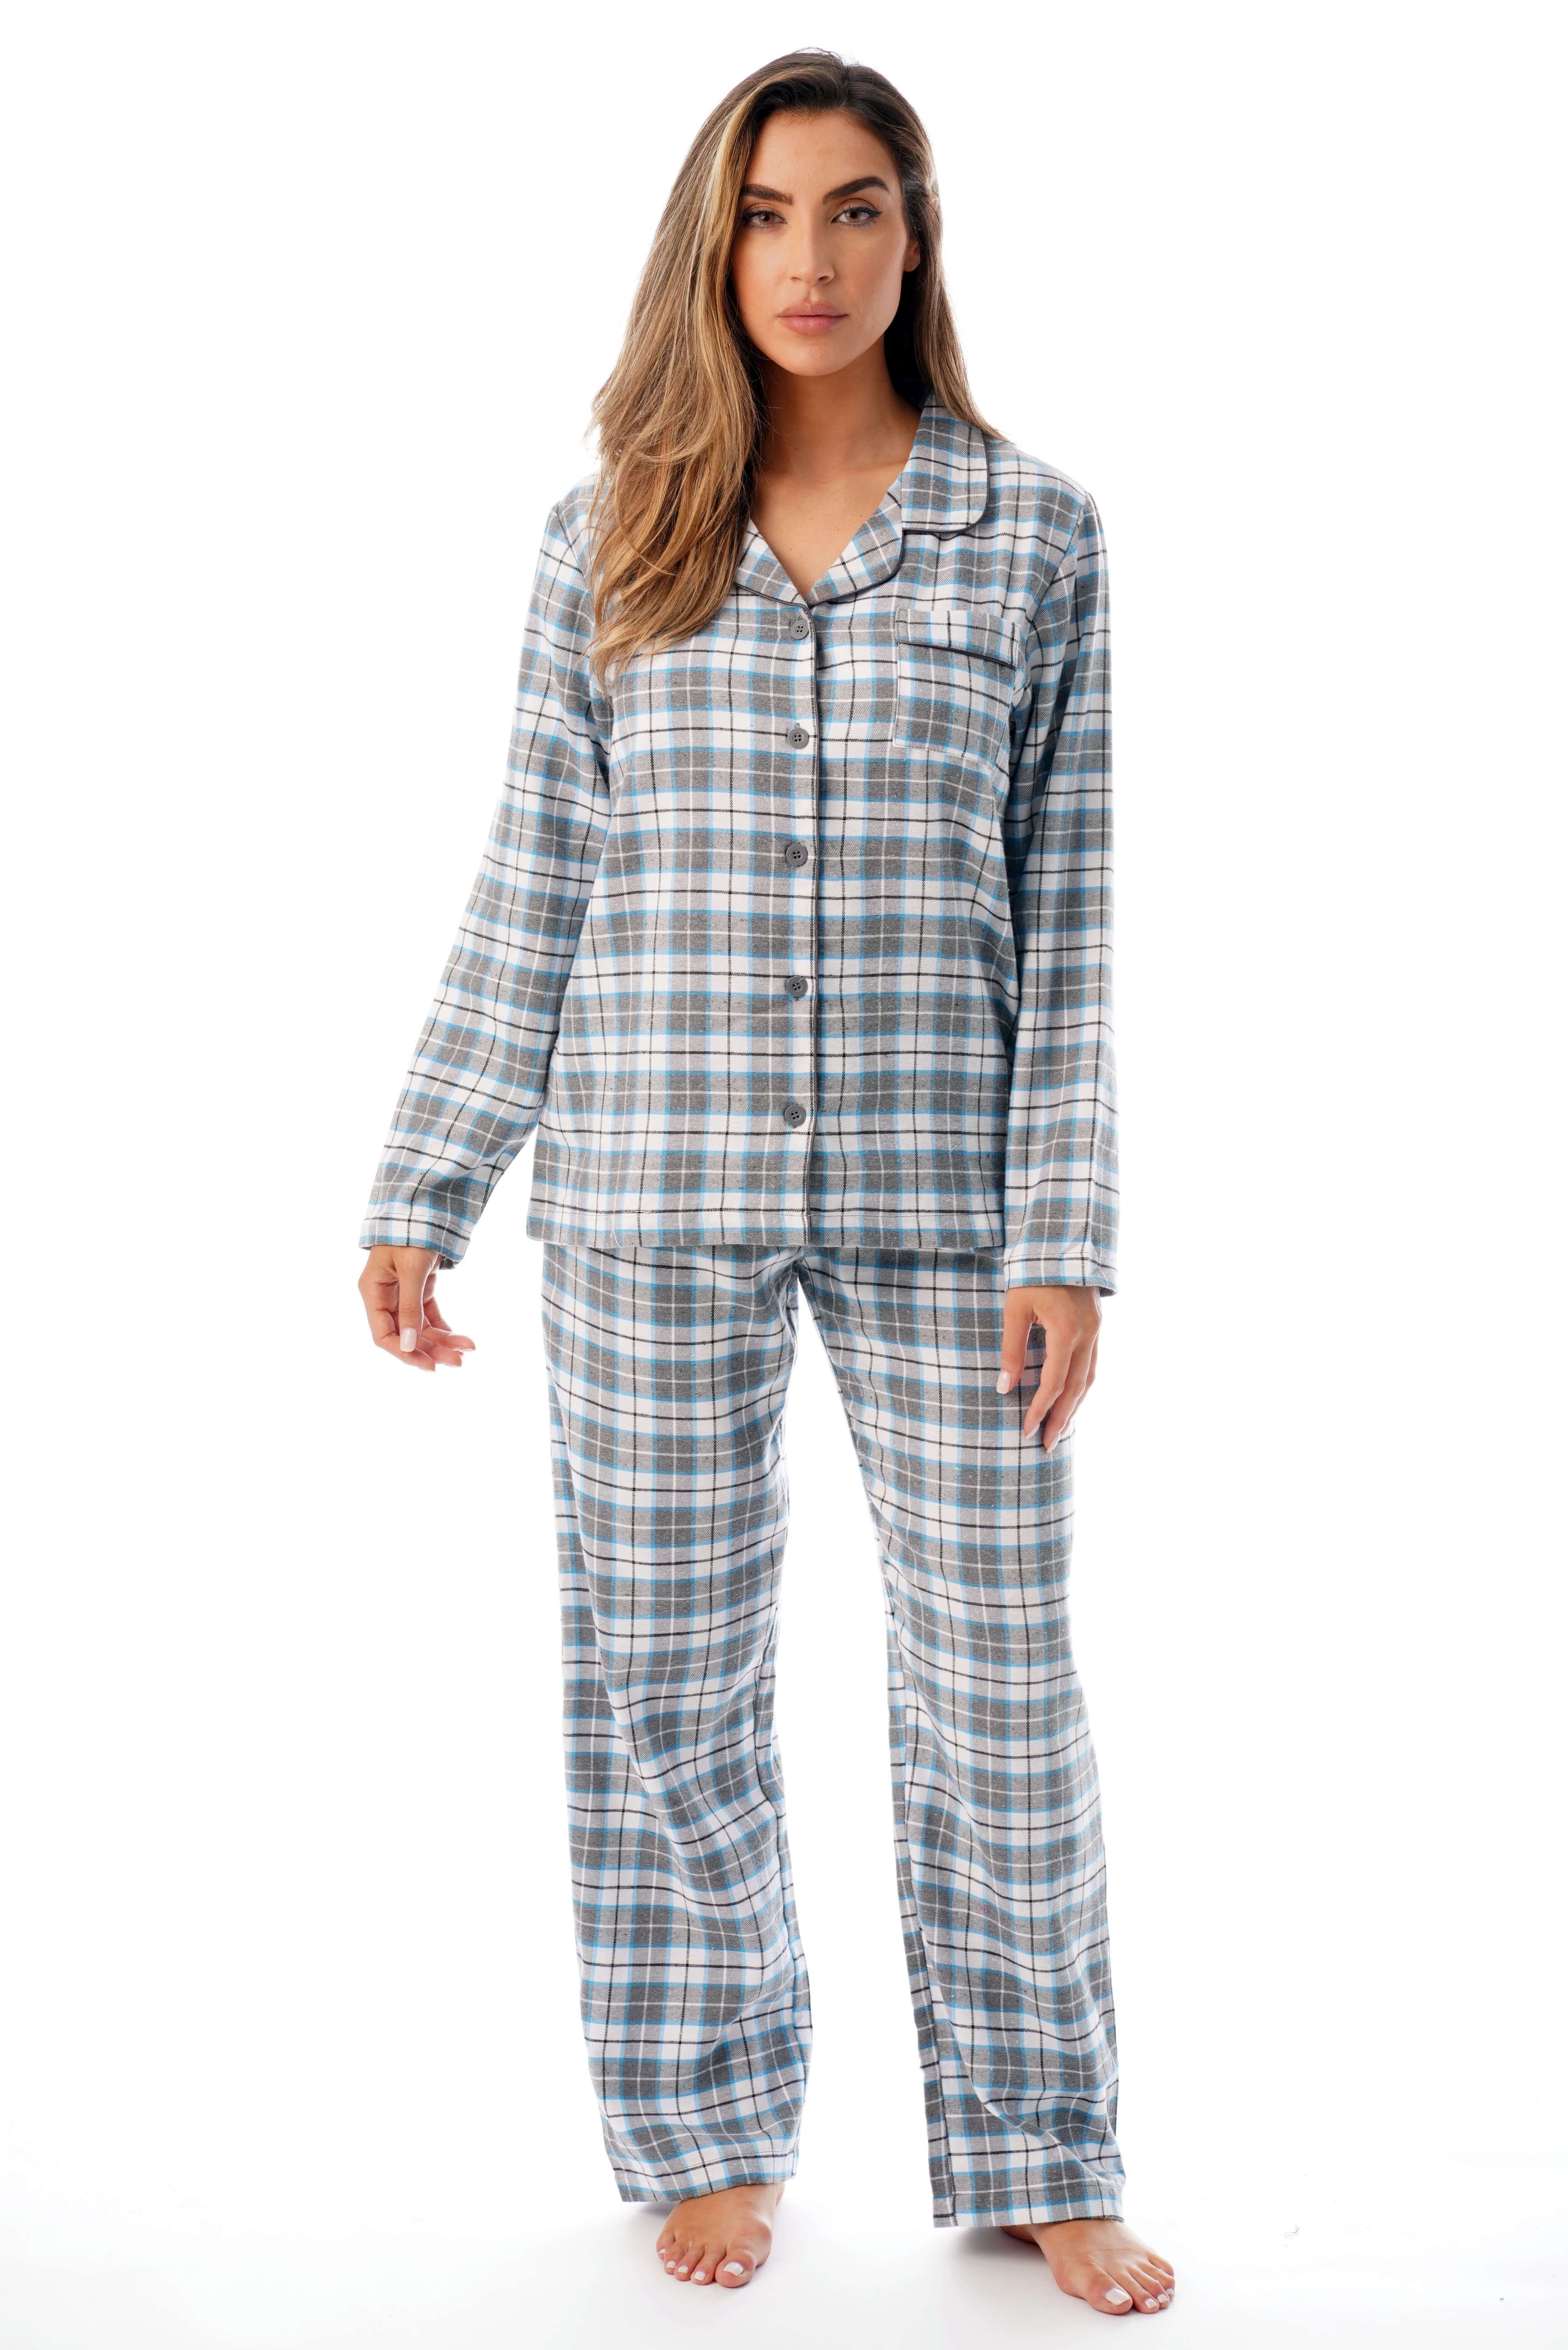 Just Love Long Sleeve Flannel Pajama Sets for Women 6760-10195-RED-3X